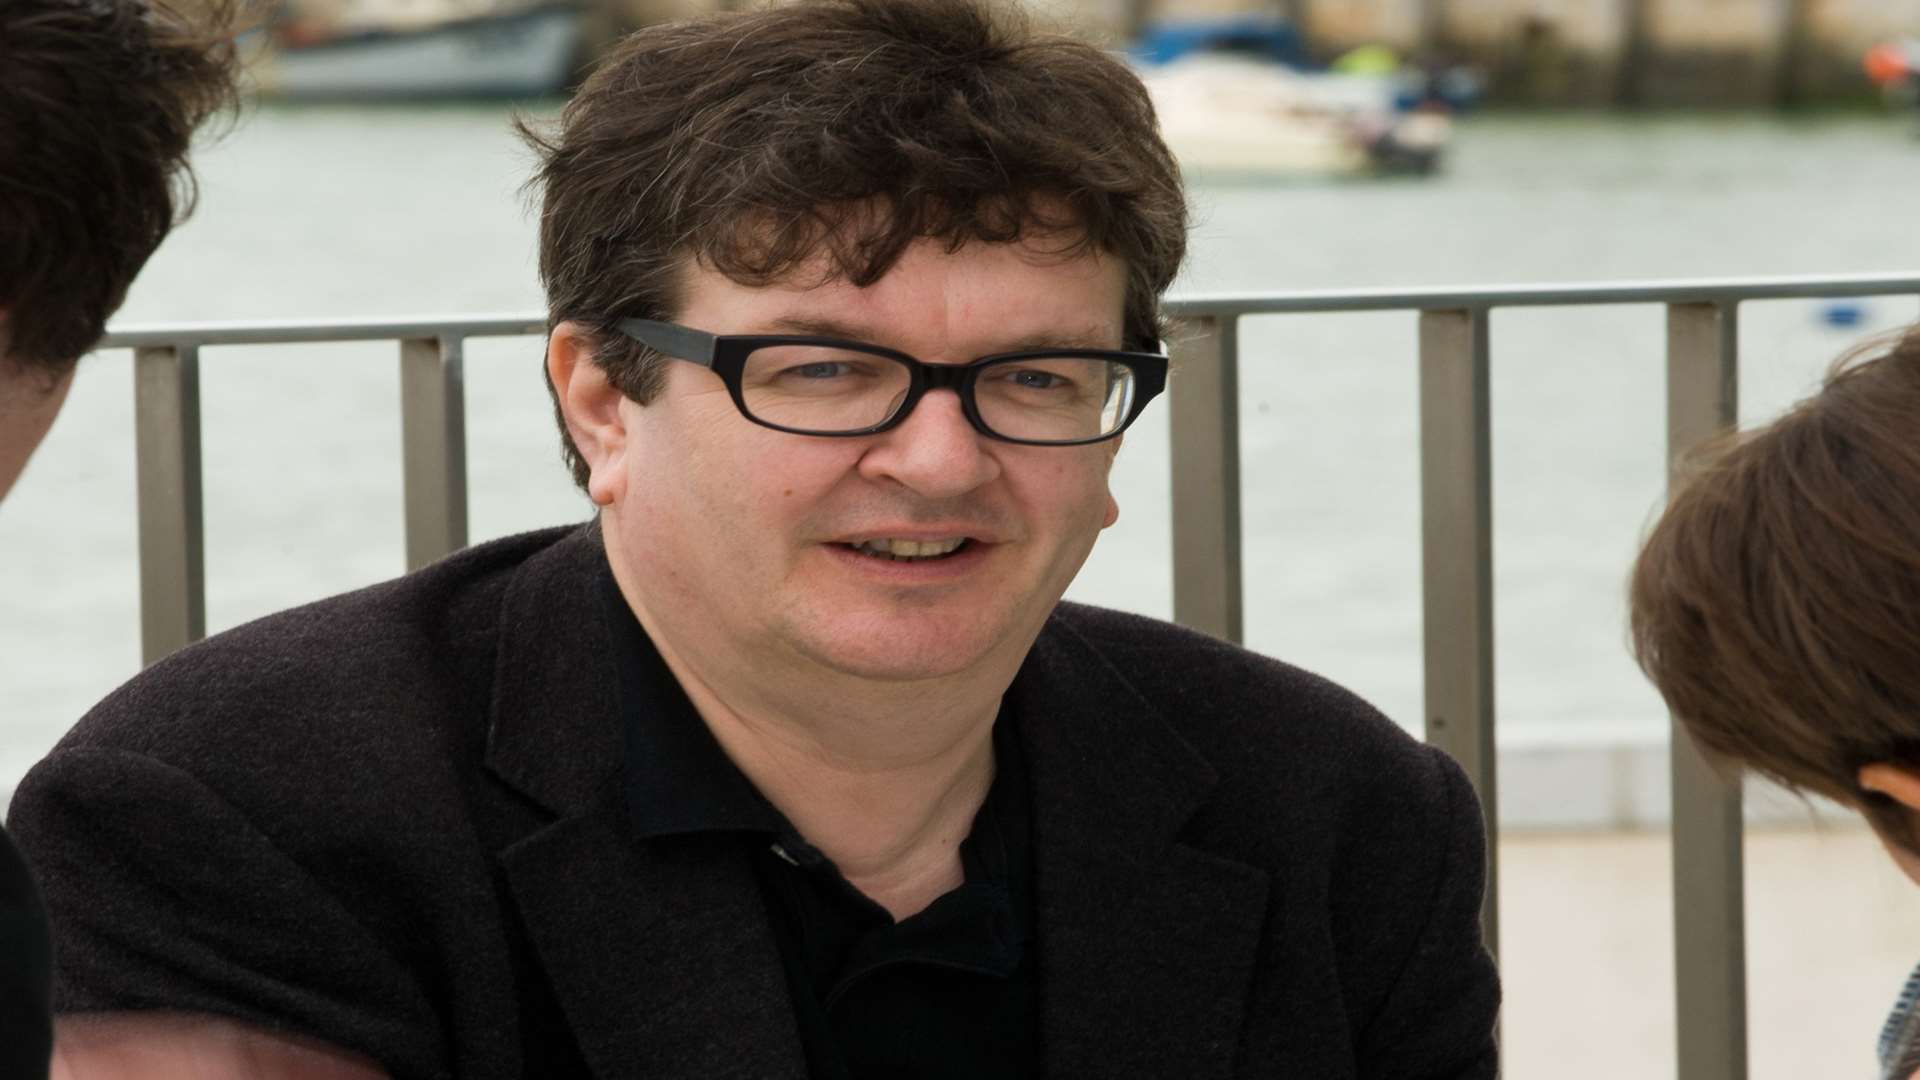 Mark Wallinger, a previous Turner Prize winner, who launched an artwork at the gallery in 2012